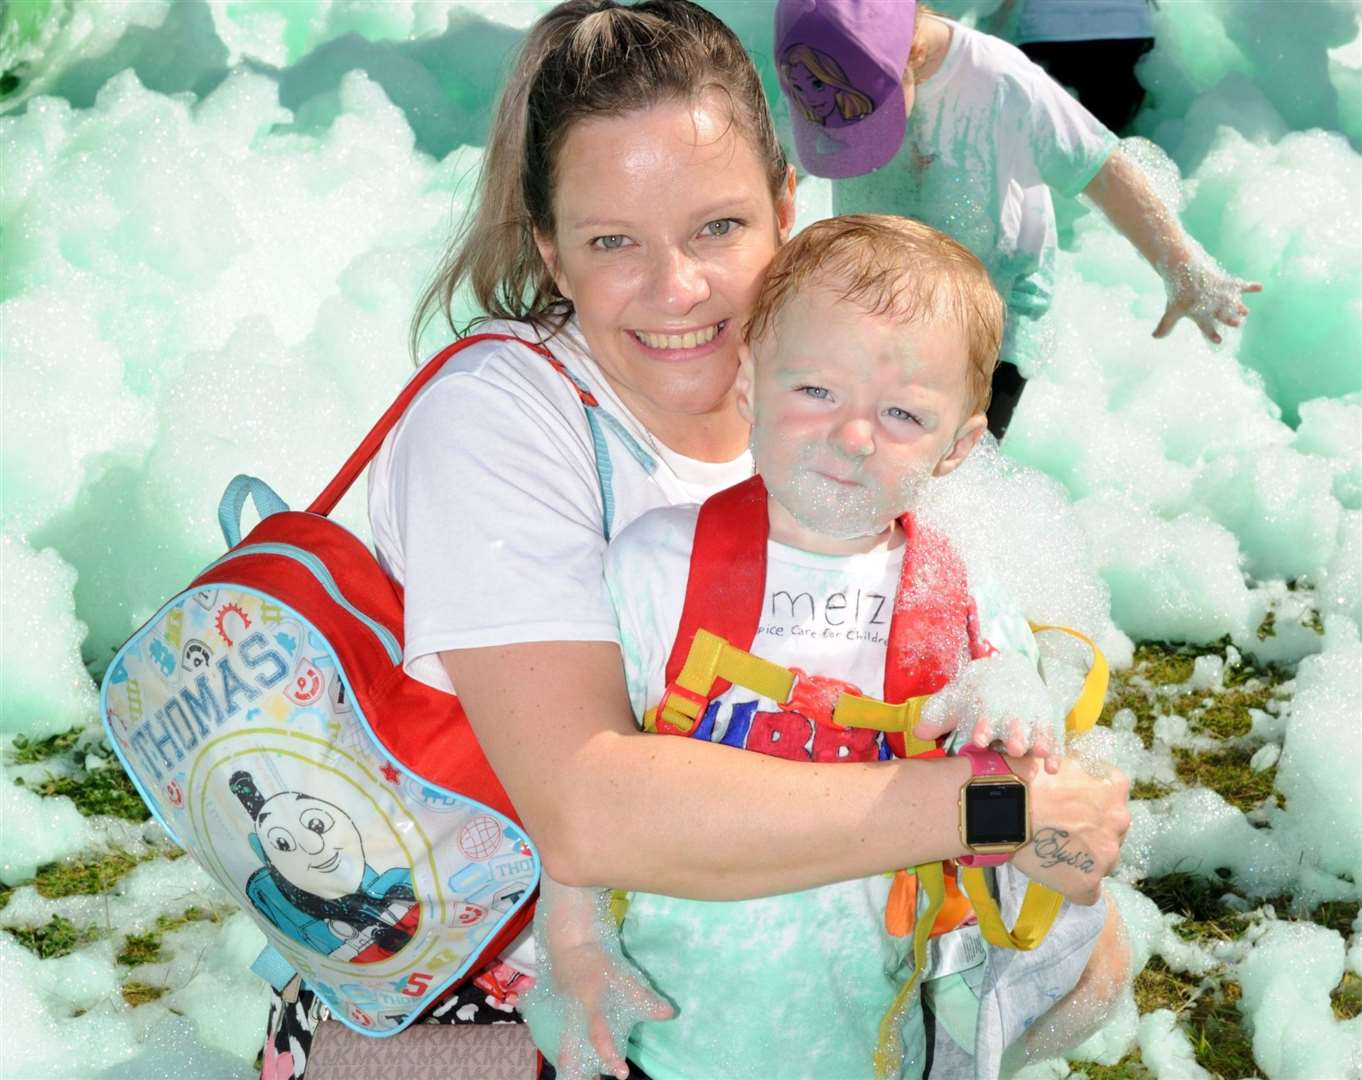 800 people attended the Bubble Rush